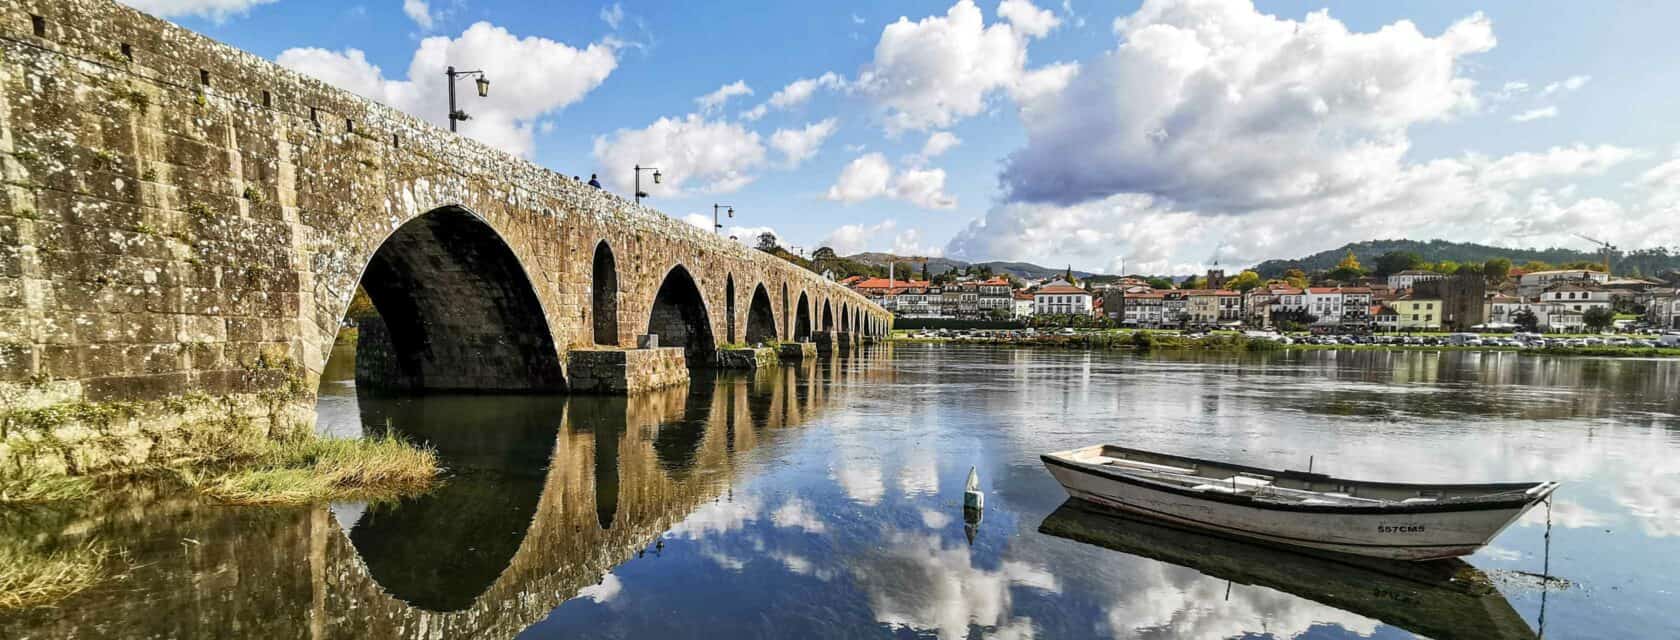 An arched bridge in Portugal.